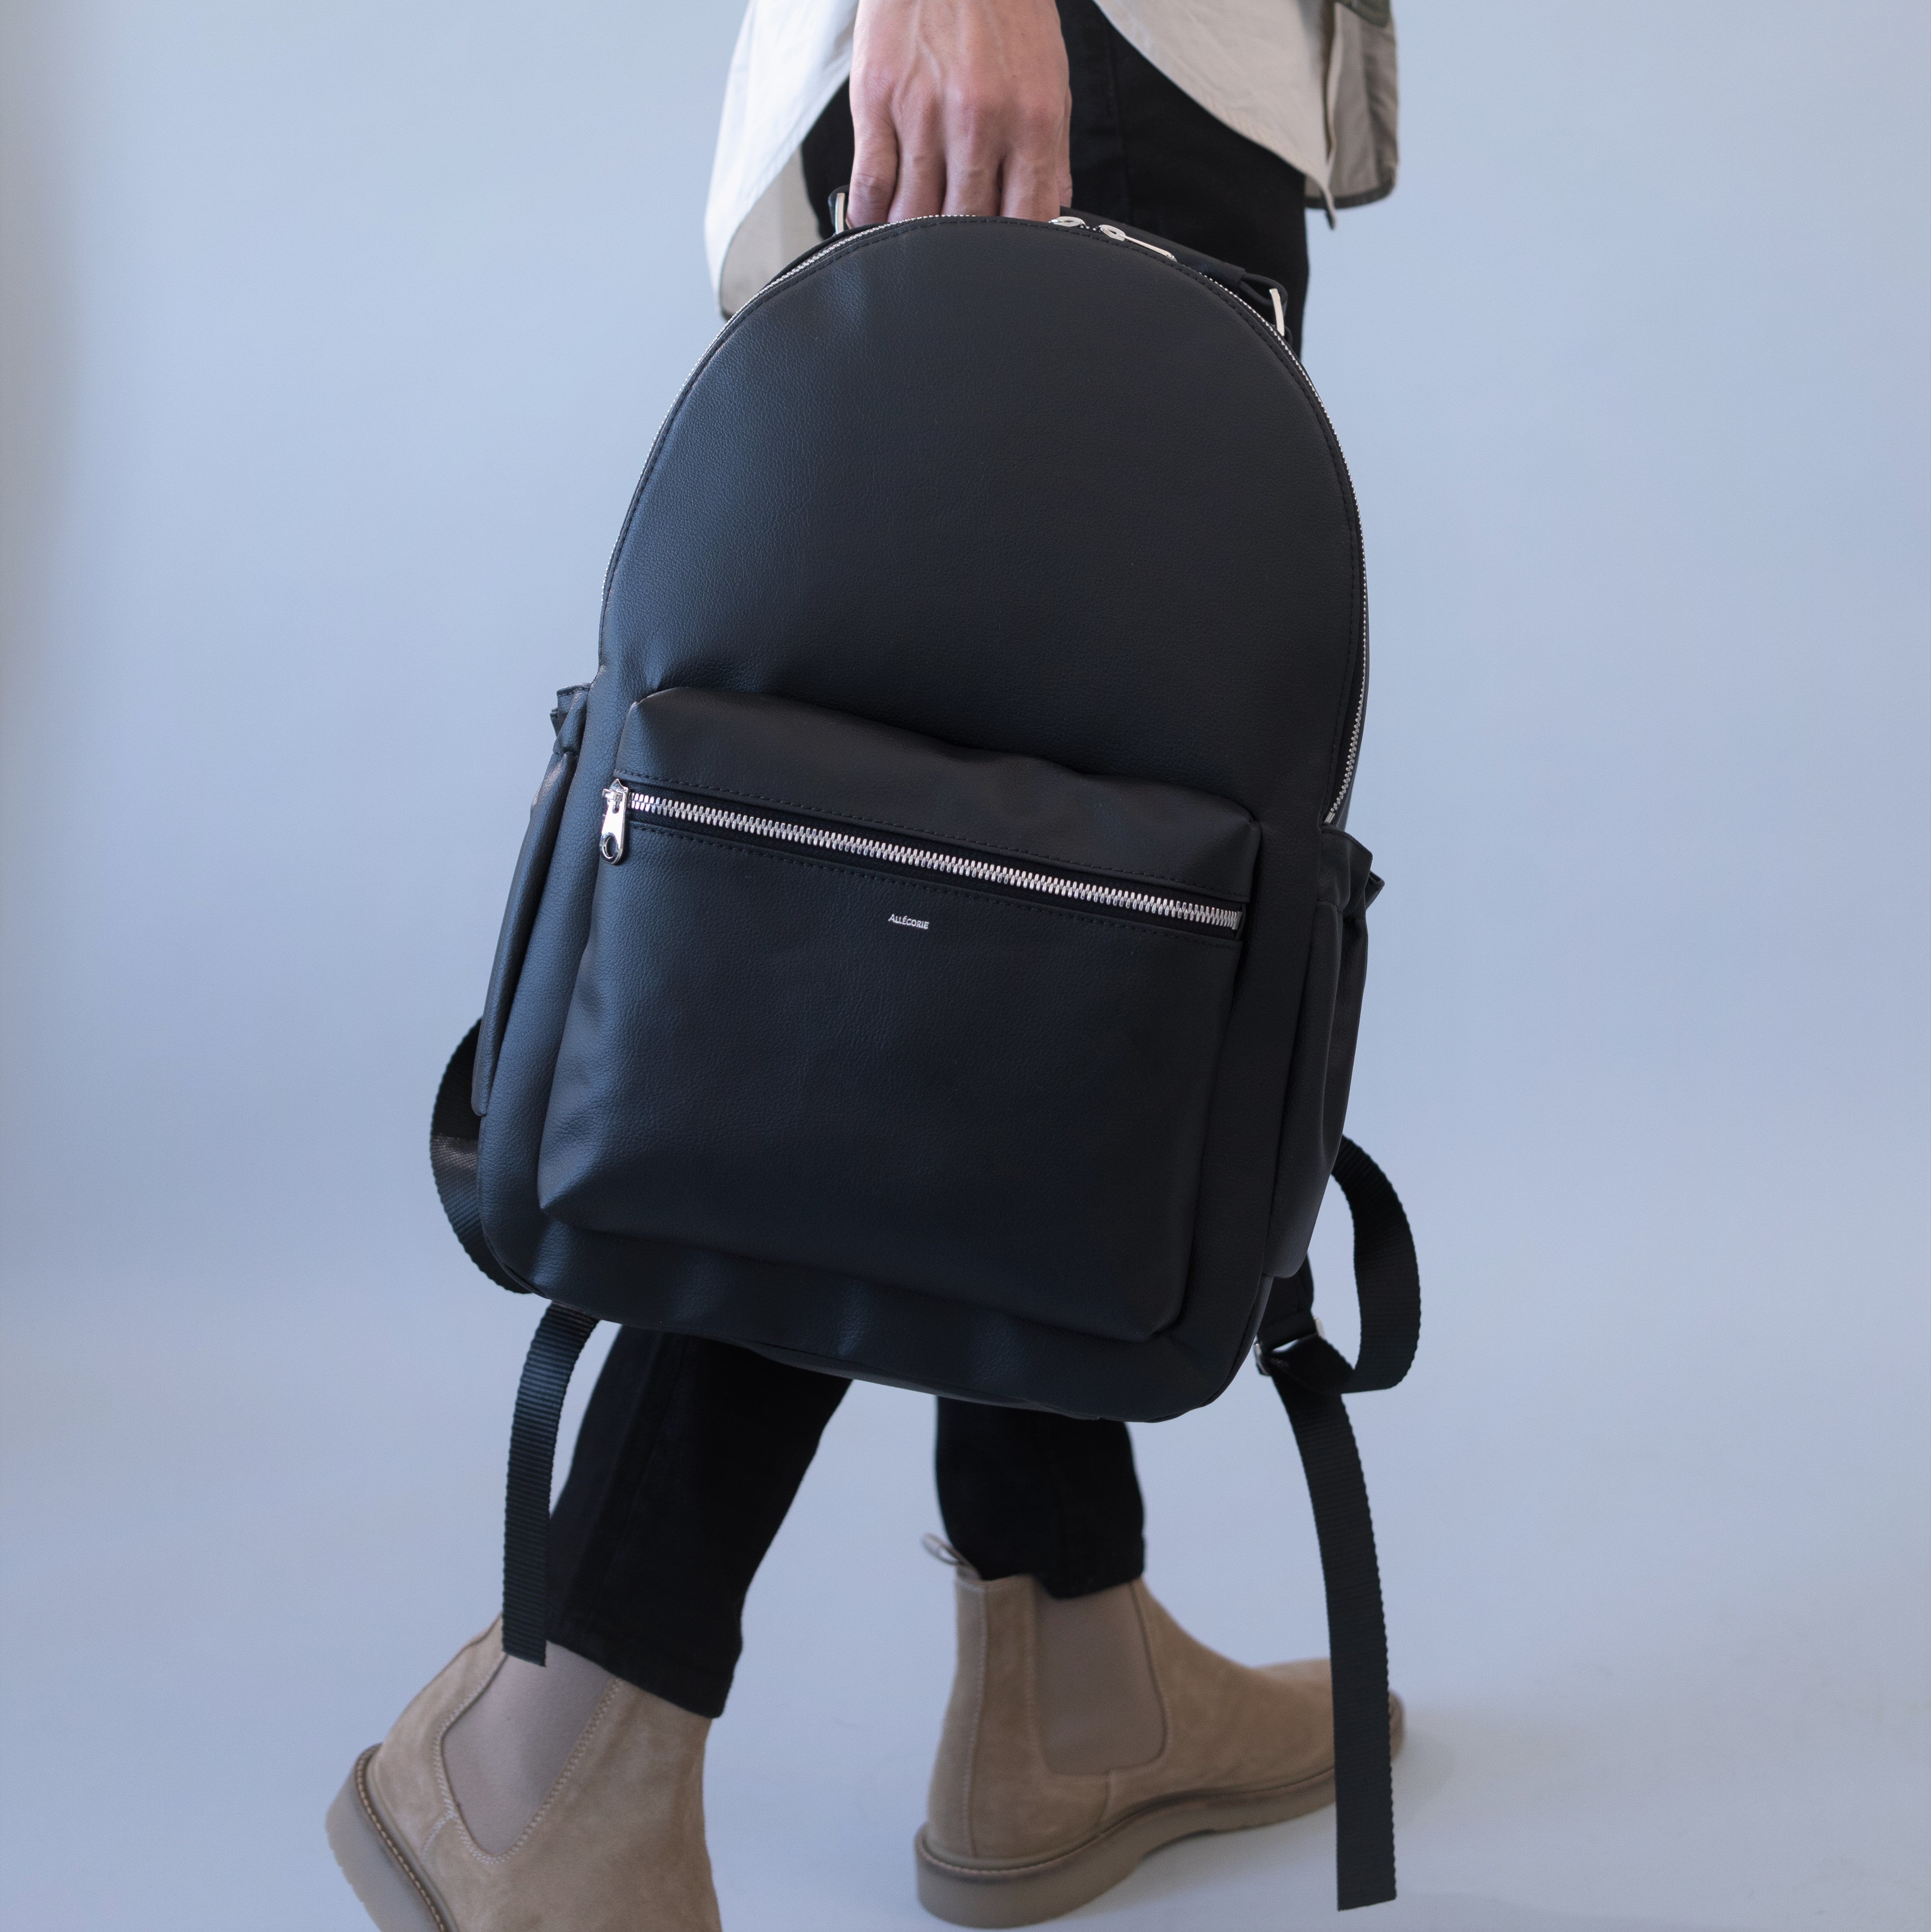 sustainable black backpack made from apples